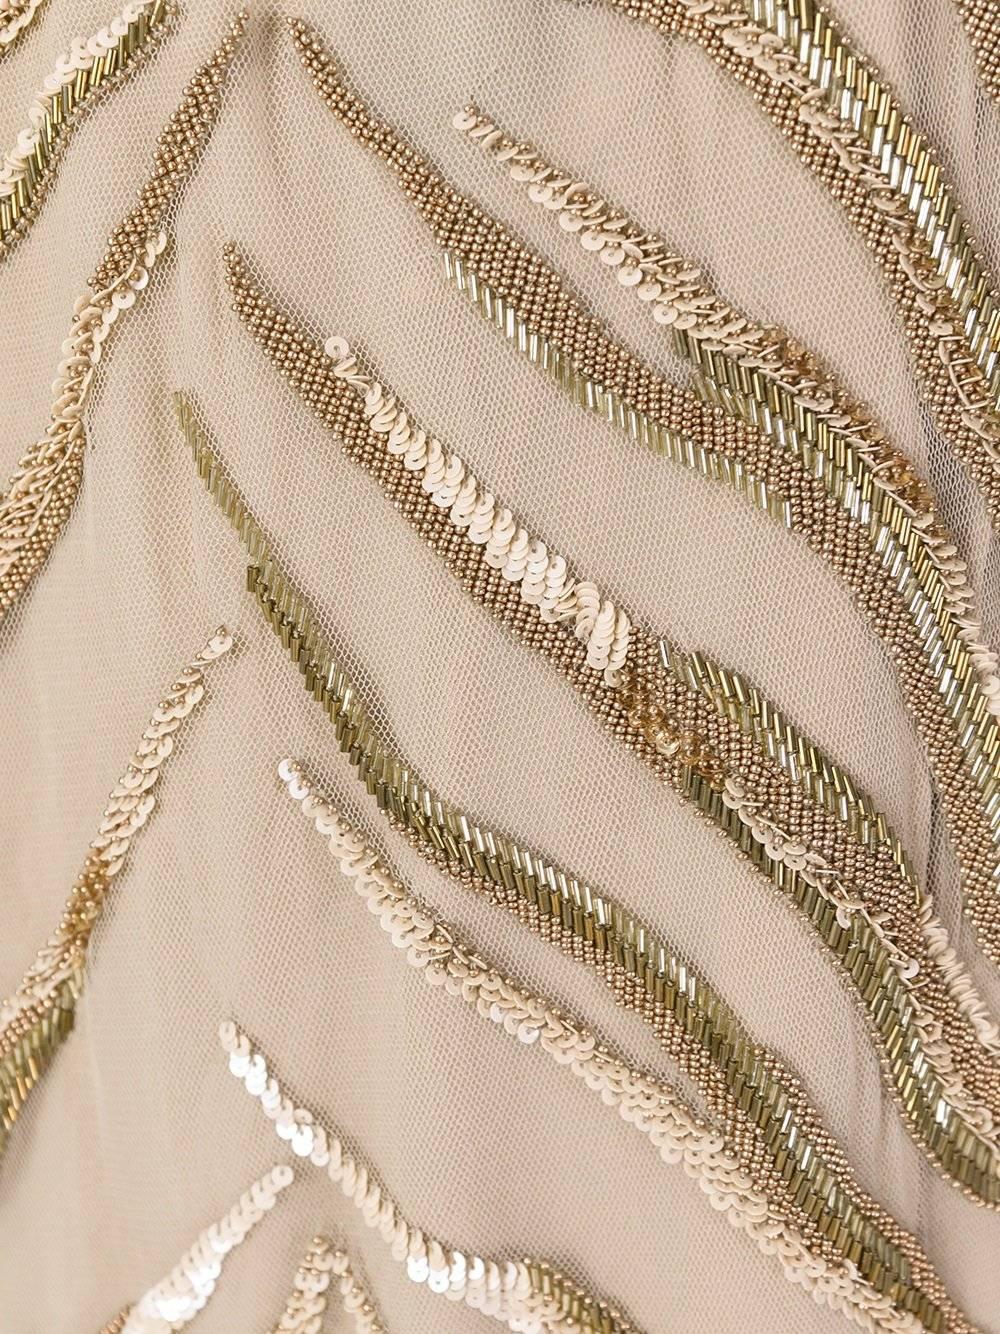 New Roberto Cavalli Nude Beaded Embroidery Mesh Dress Gown size 40 6